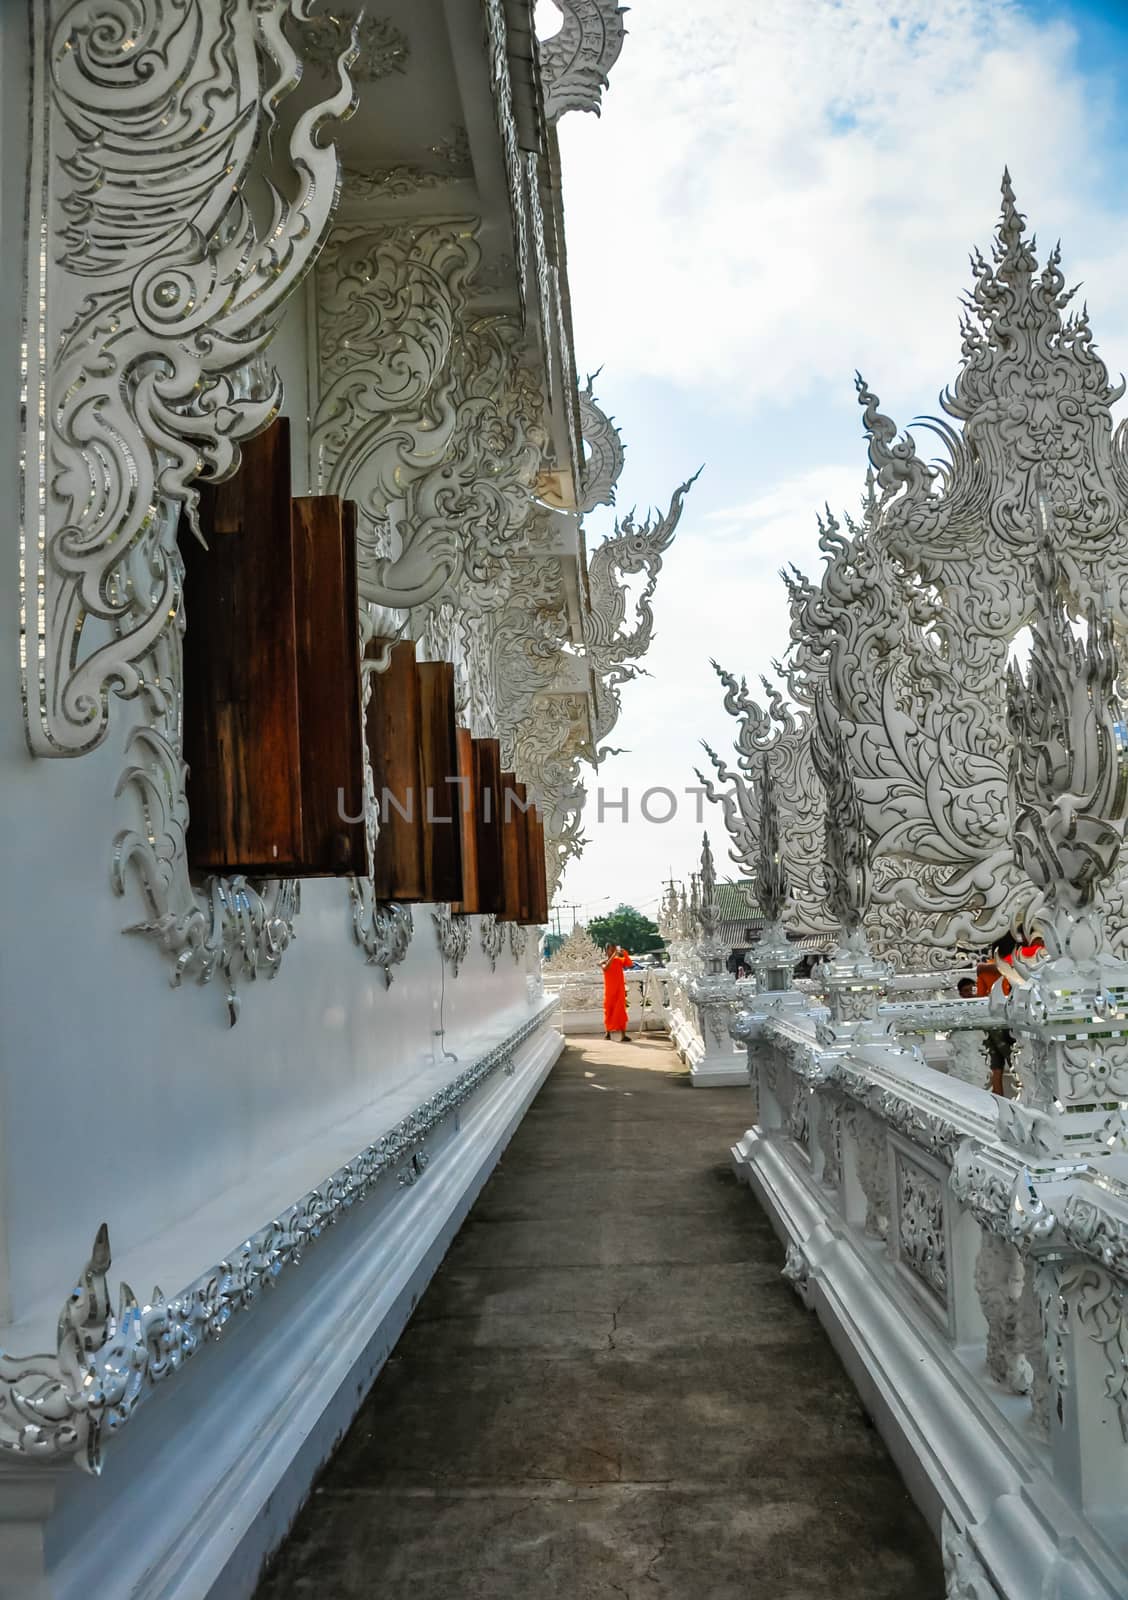 Wat Rong Khun in Chiang Rai, Thailand, the beautiful temple is integration of traditional Thai architecture and the surreal, more well-known of foreigners as the "White Temple".